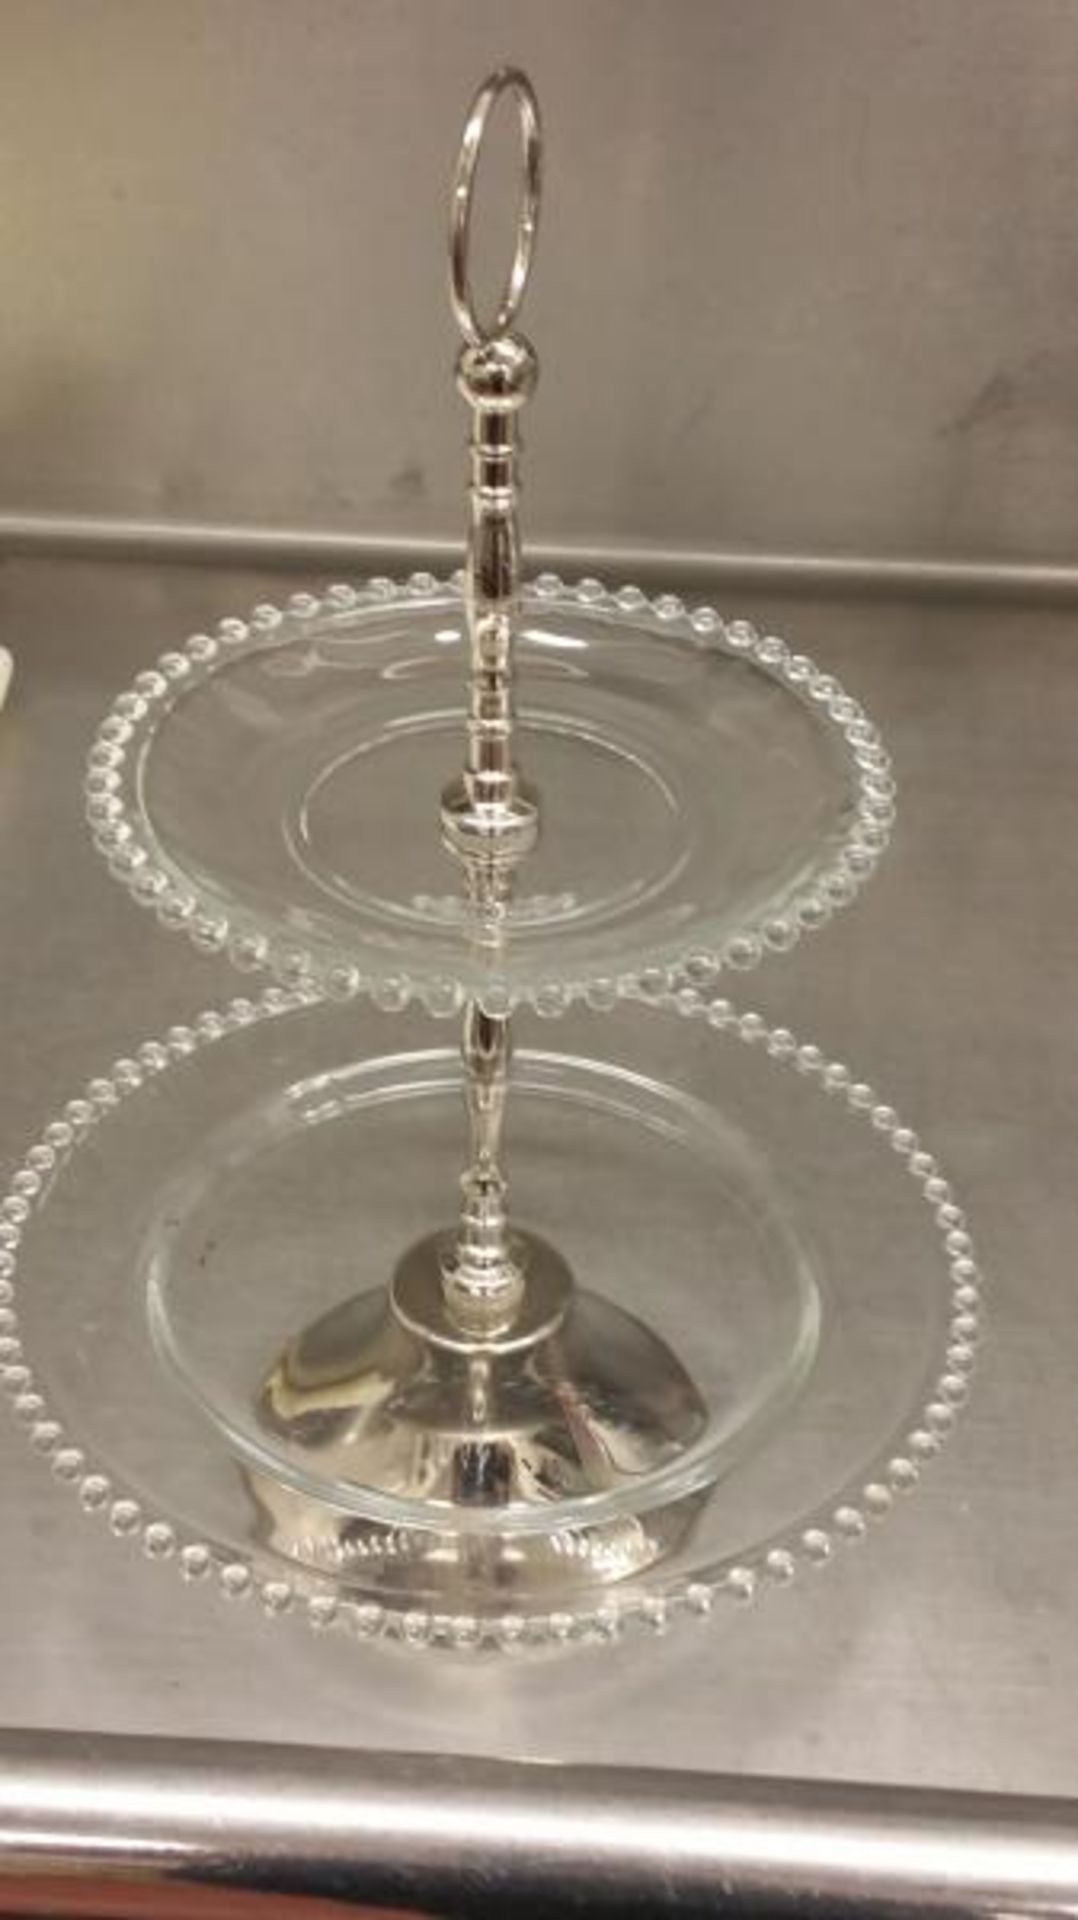 2 and 3 Tier Glass and Stainless Pastry Displays Rigging Cost: $10